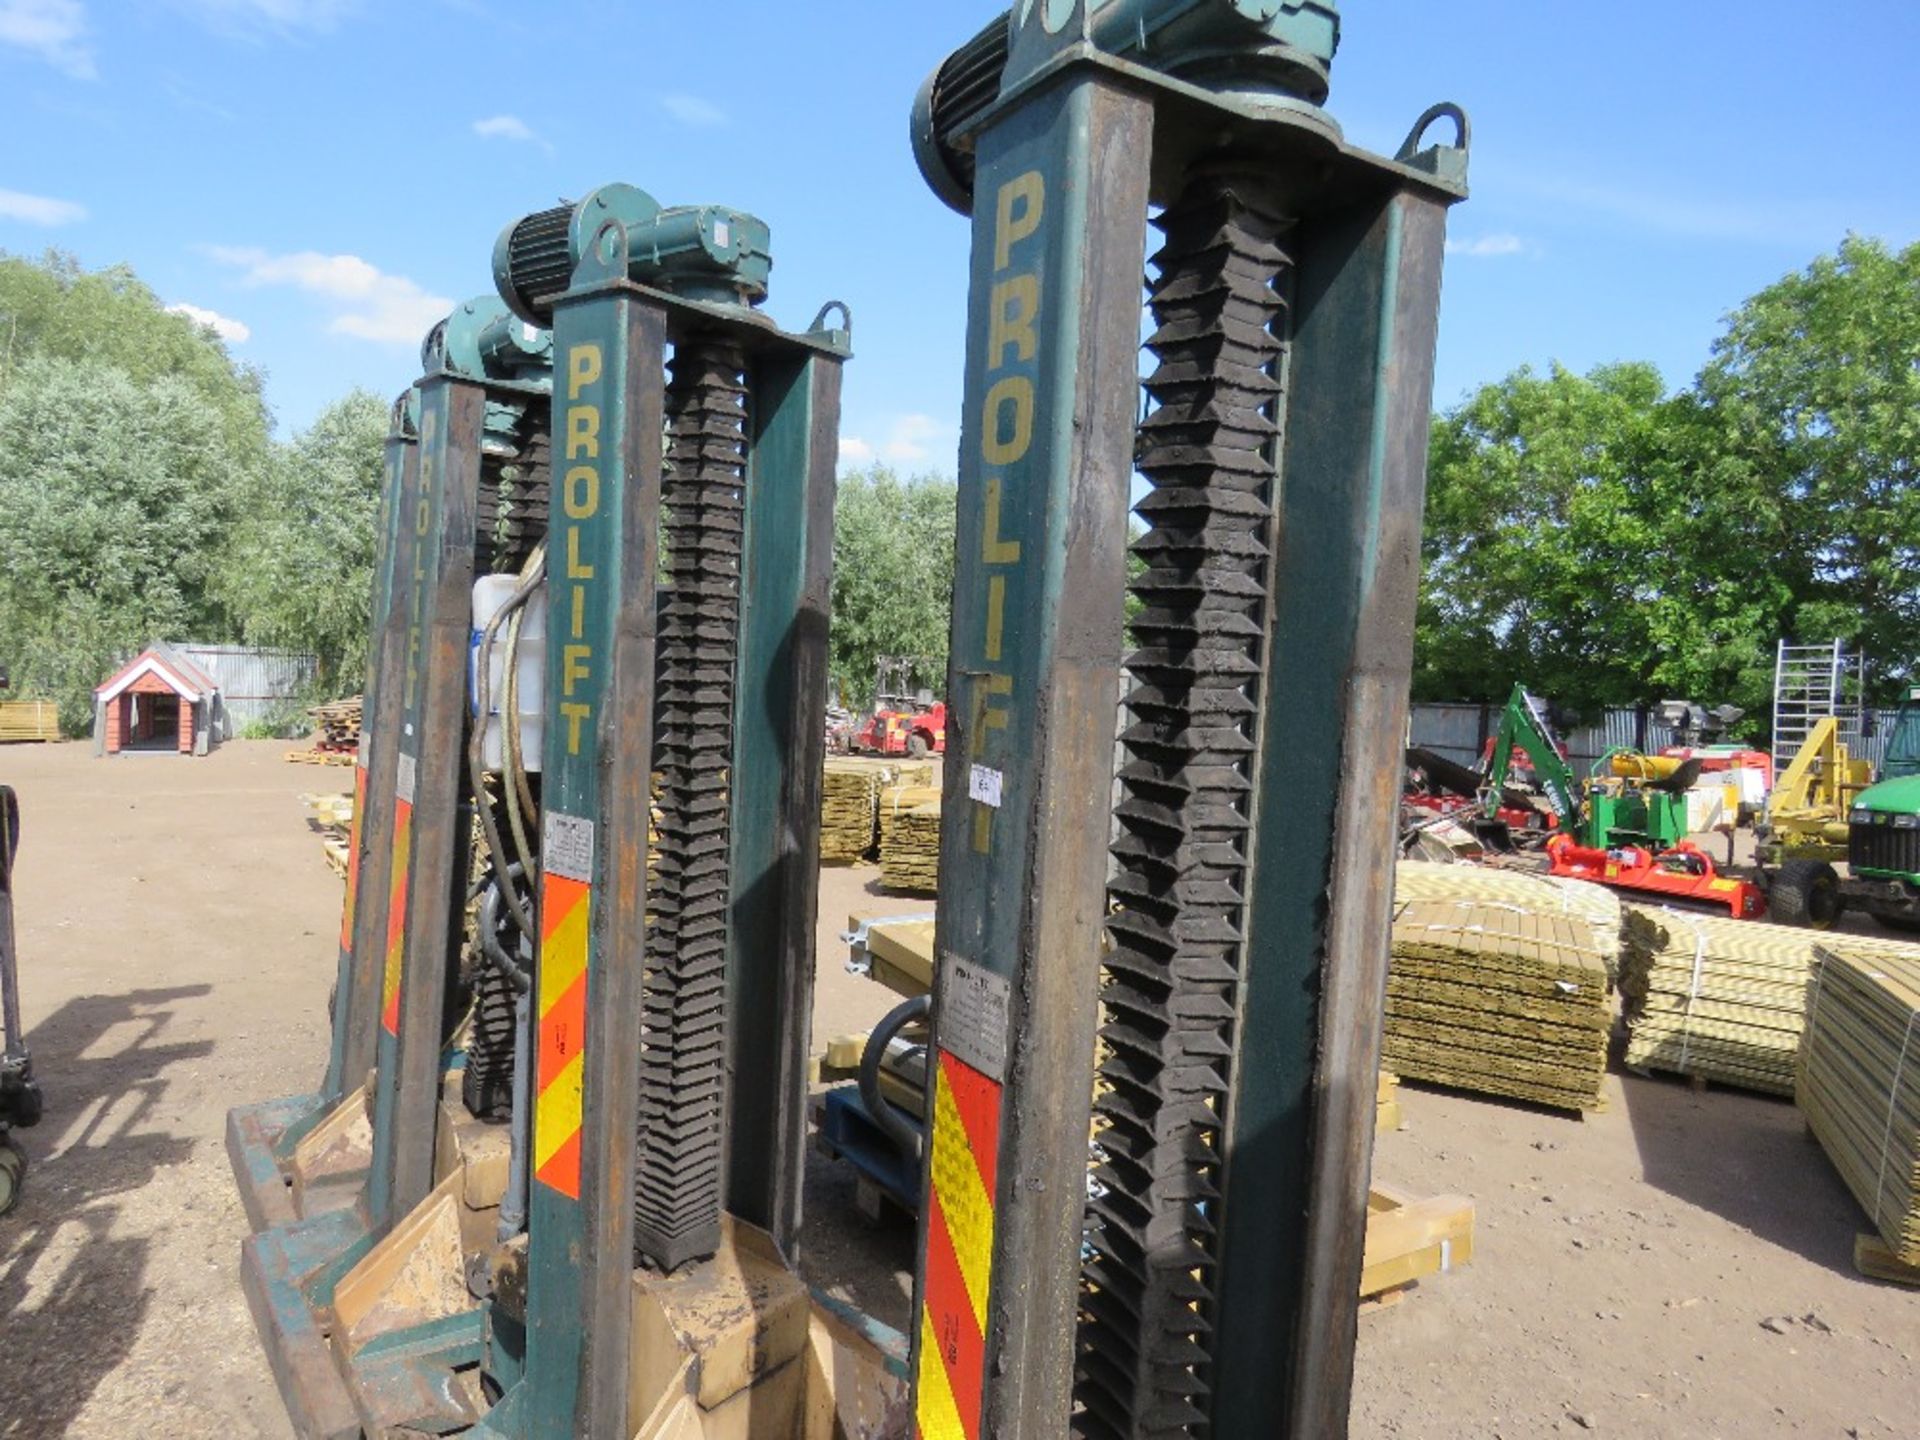 SET OF 4 X PROLIFT PL32 PORTABLE COLUMN LIFT UNITS FOR COMMERCIAL VEHICLES, 8 TONNE RATED CAPACITY,